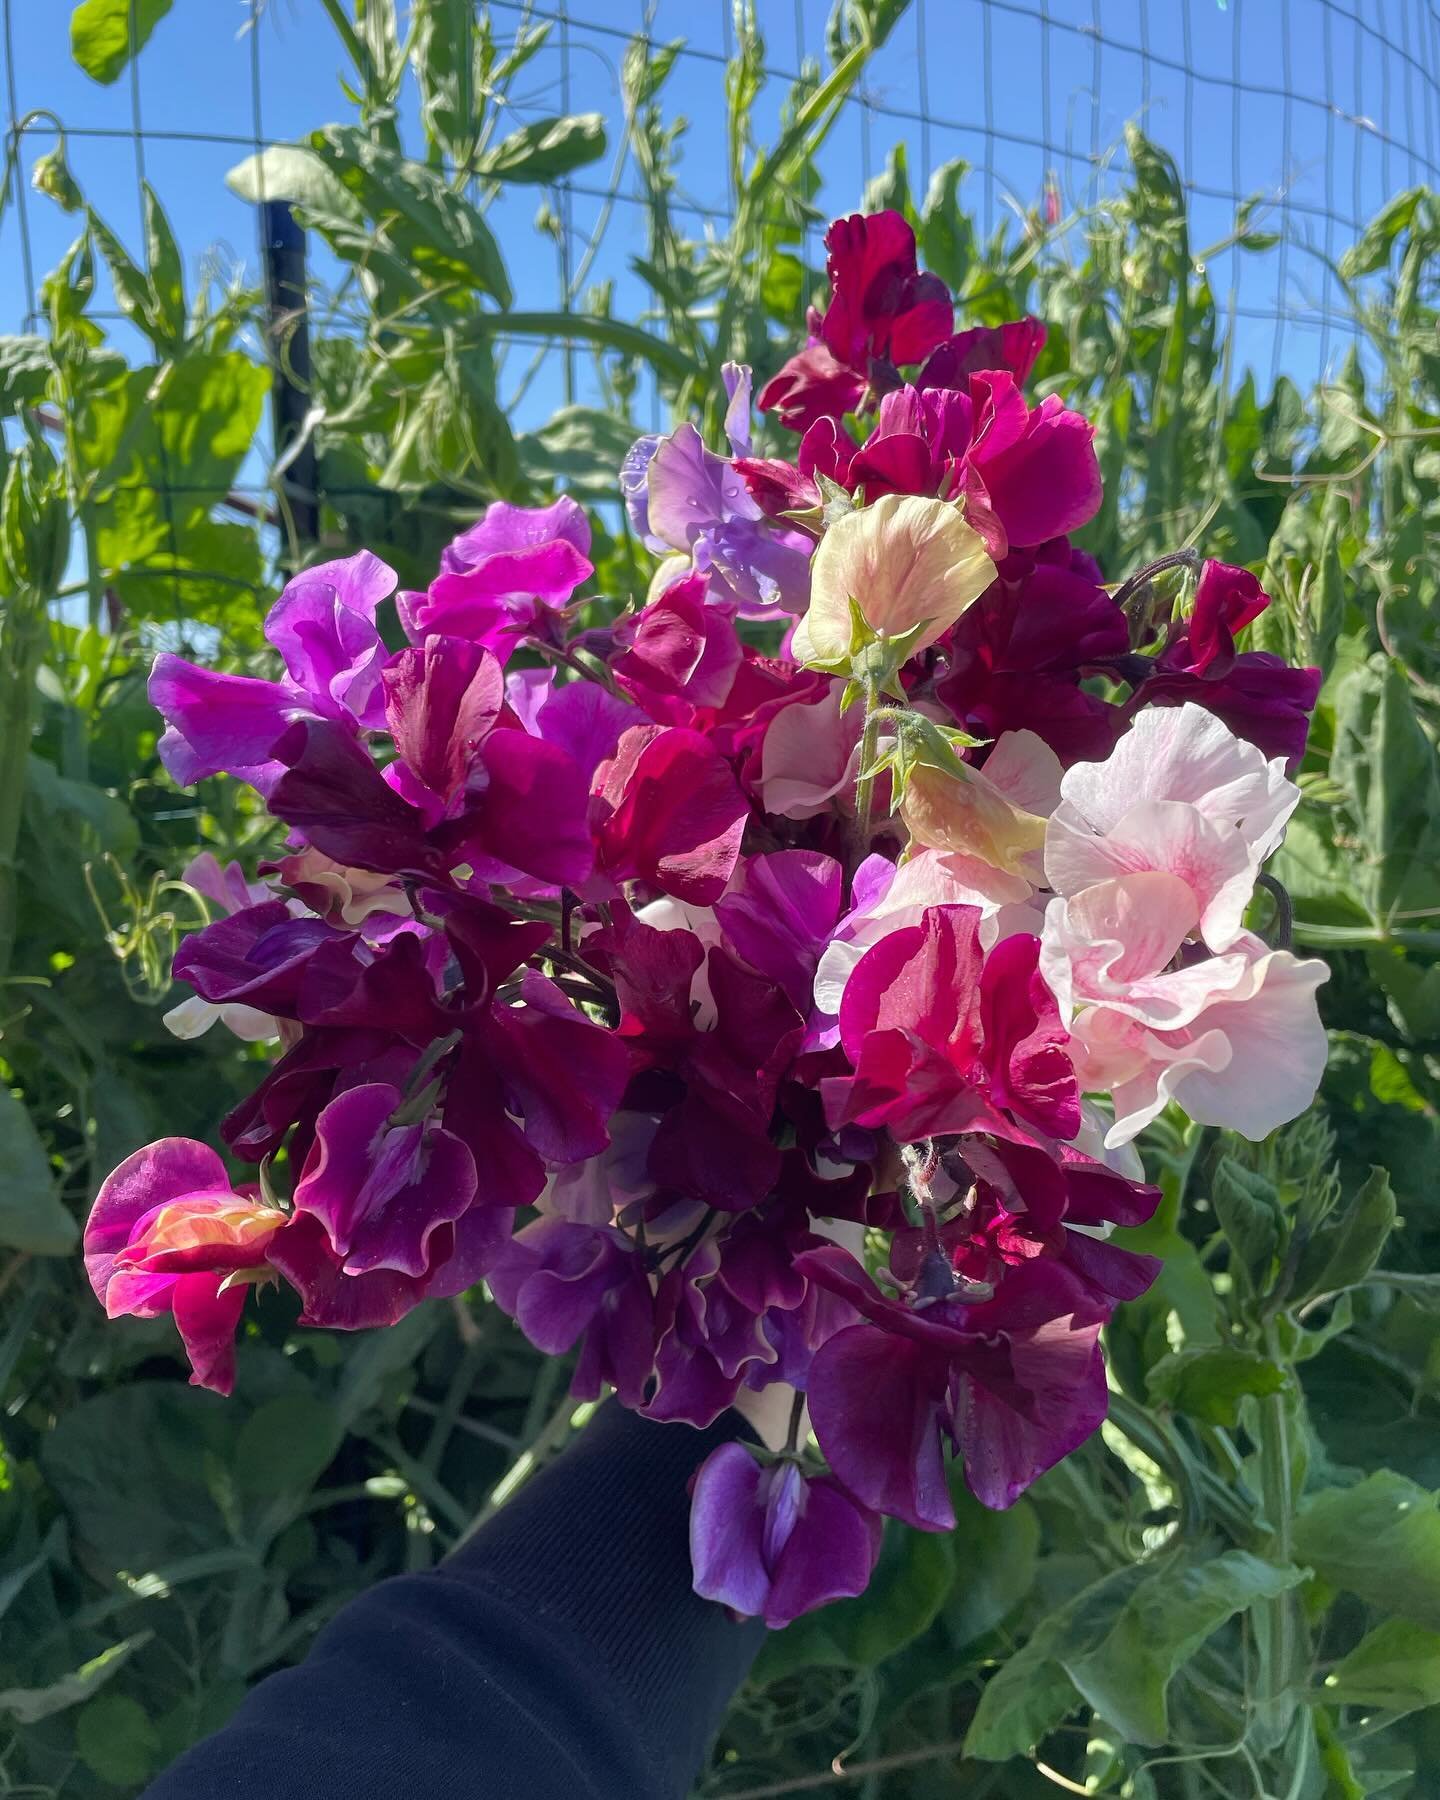 Sweet peas are what got me to fall in love with growing flowers back in the spring of 2017. ✨

Their scent reminds me of healing and the absolute joy that comes from cutting from your own backyard flowers.

These are the first sweet pea cuts from 202